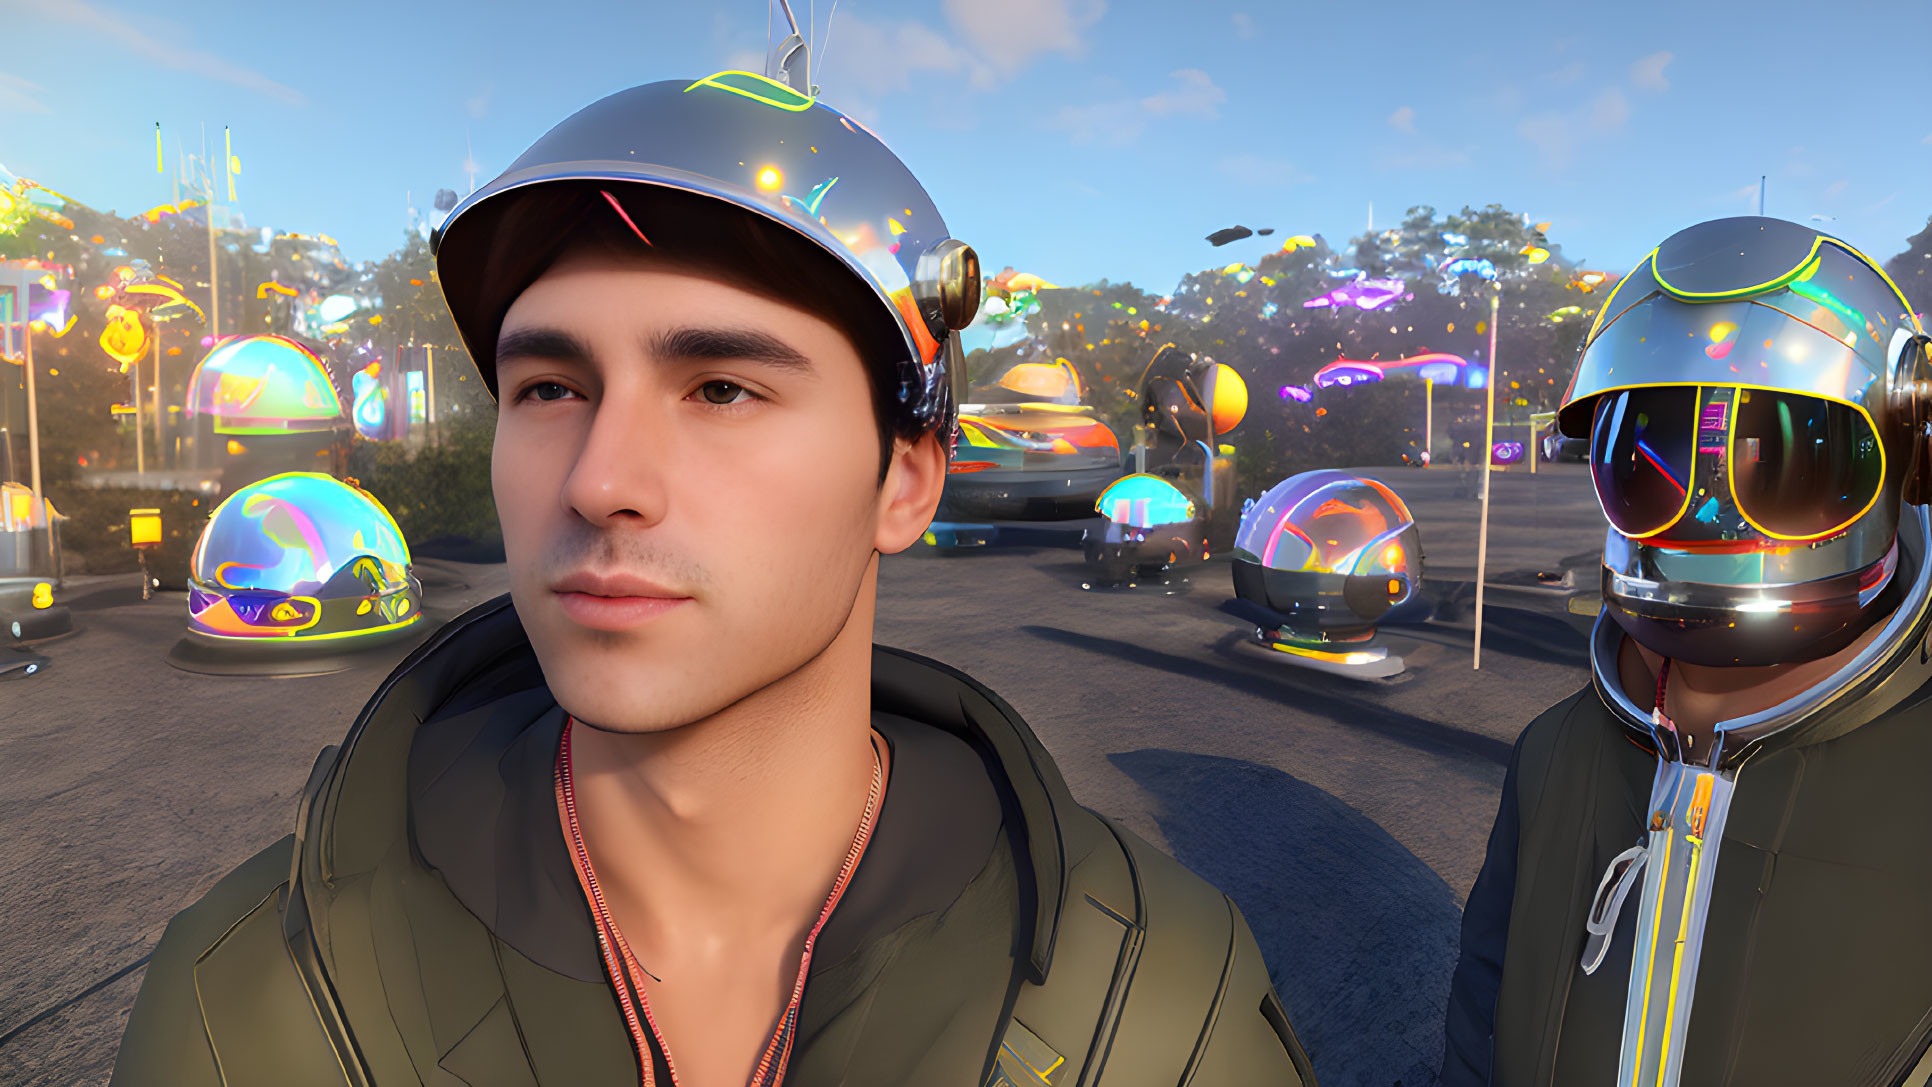 Young man in cap with futuristic helmeted figures and neon-lit structures